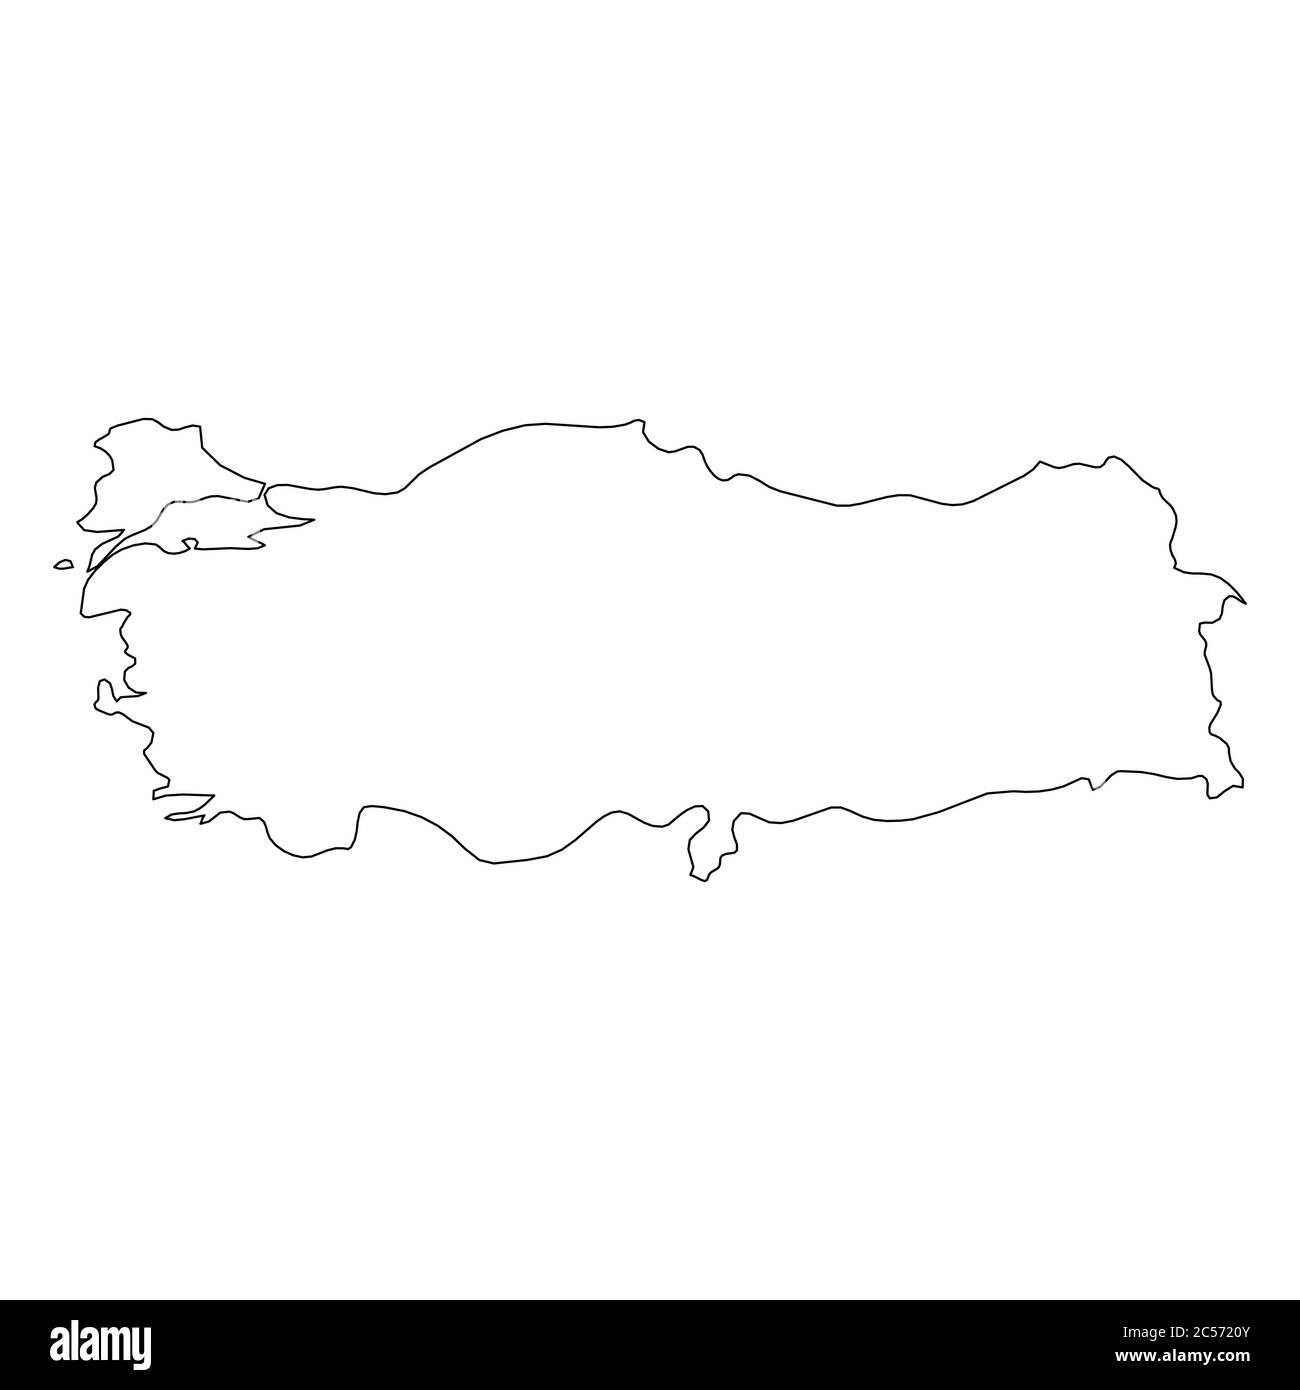 Turkey - solid black outline border map of country area. Simple flat vector illustration. Stock Vector